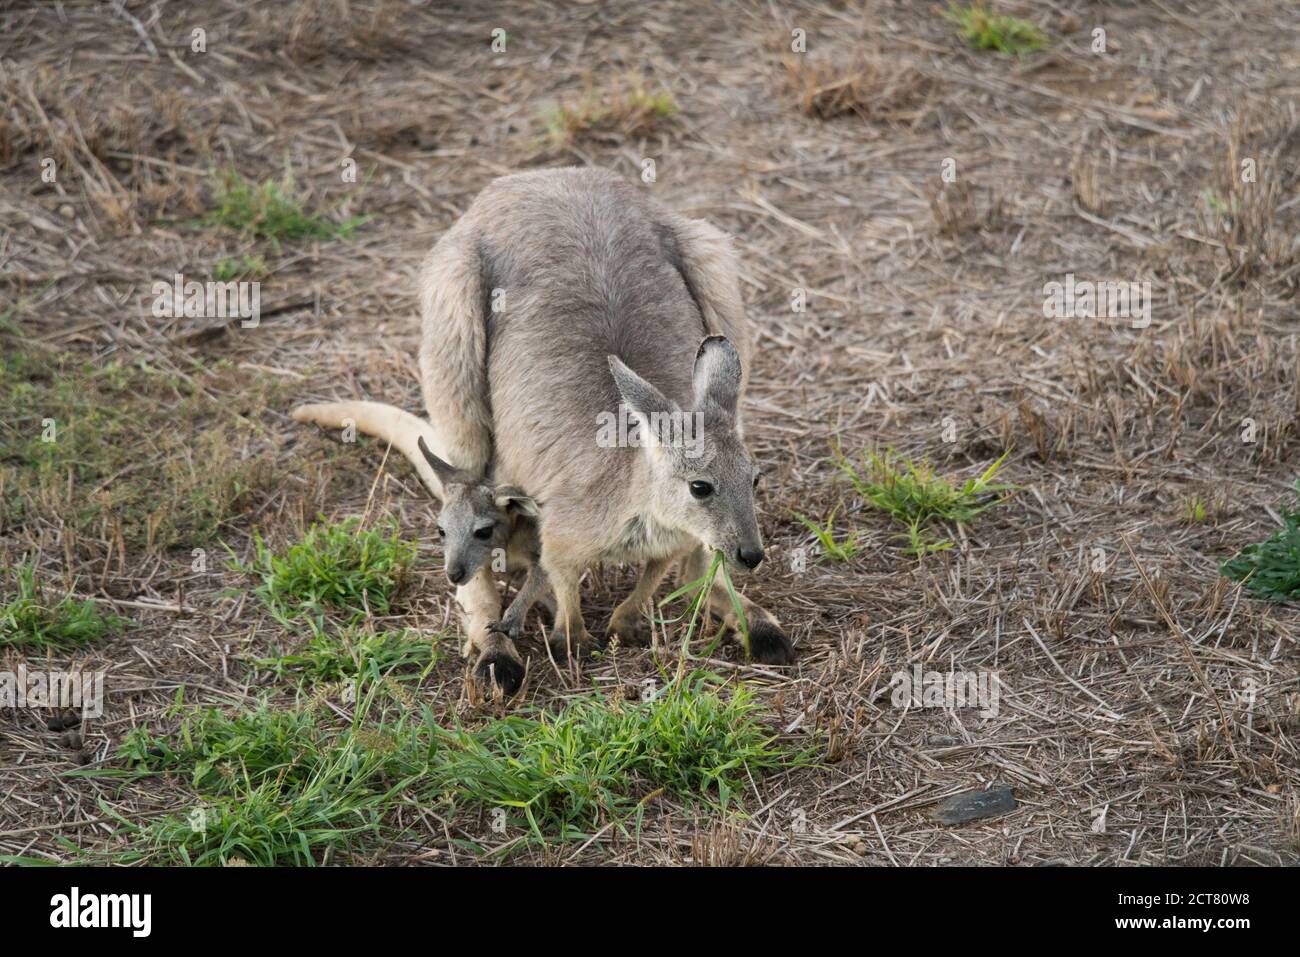 Eastern grey, Macropus giganteus, also known as great grey or Forester kangaroo eating grass with baby joey in pouch Stock Photo